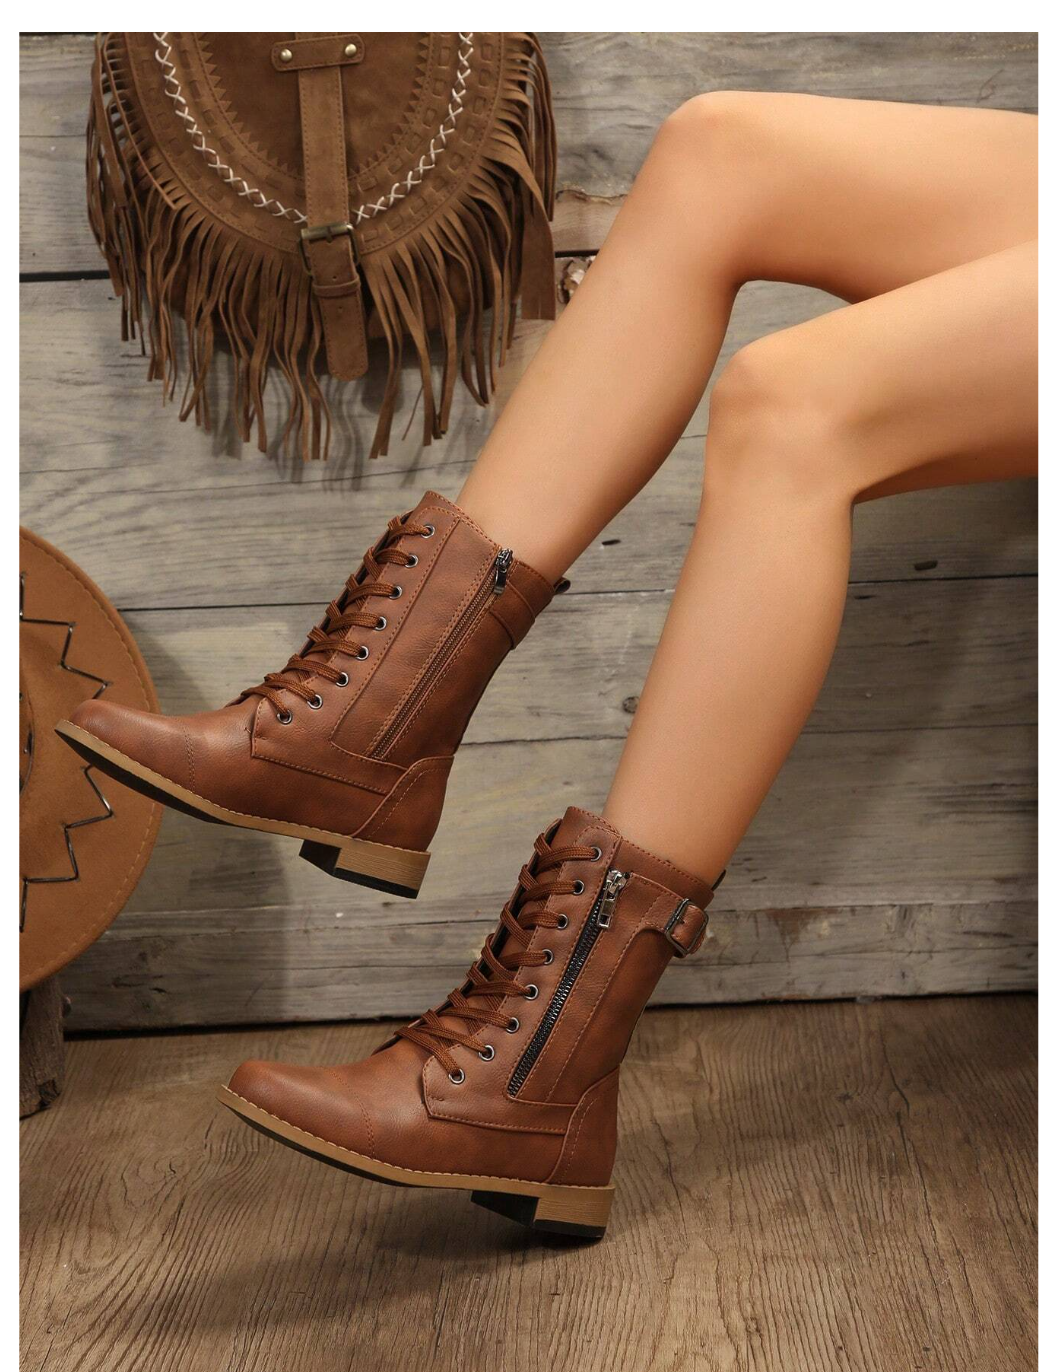 Step Into Style: Women's Fashionable Outdoor Spring and Autumn Boots